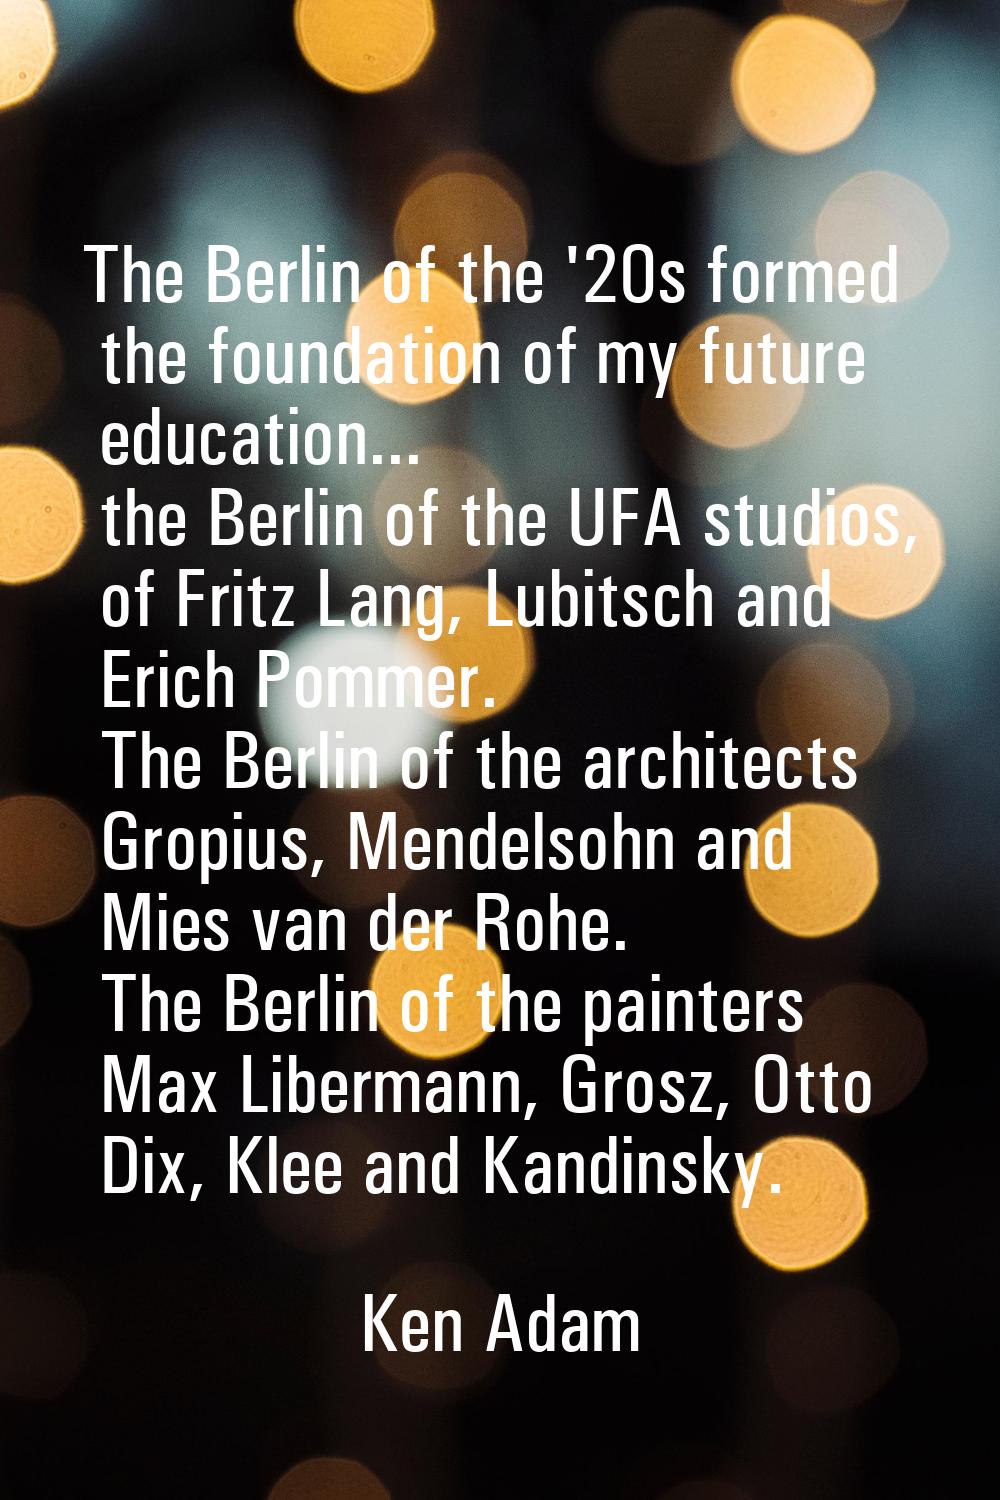 The Berlin of the '20s formed the foundation of my future education... the Berlin of the UFA studio